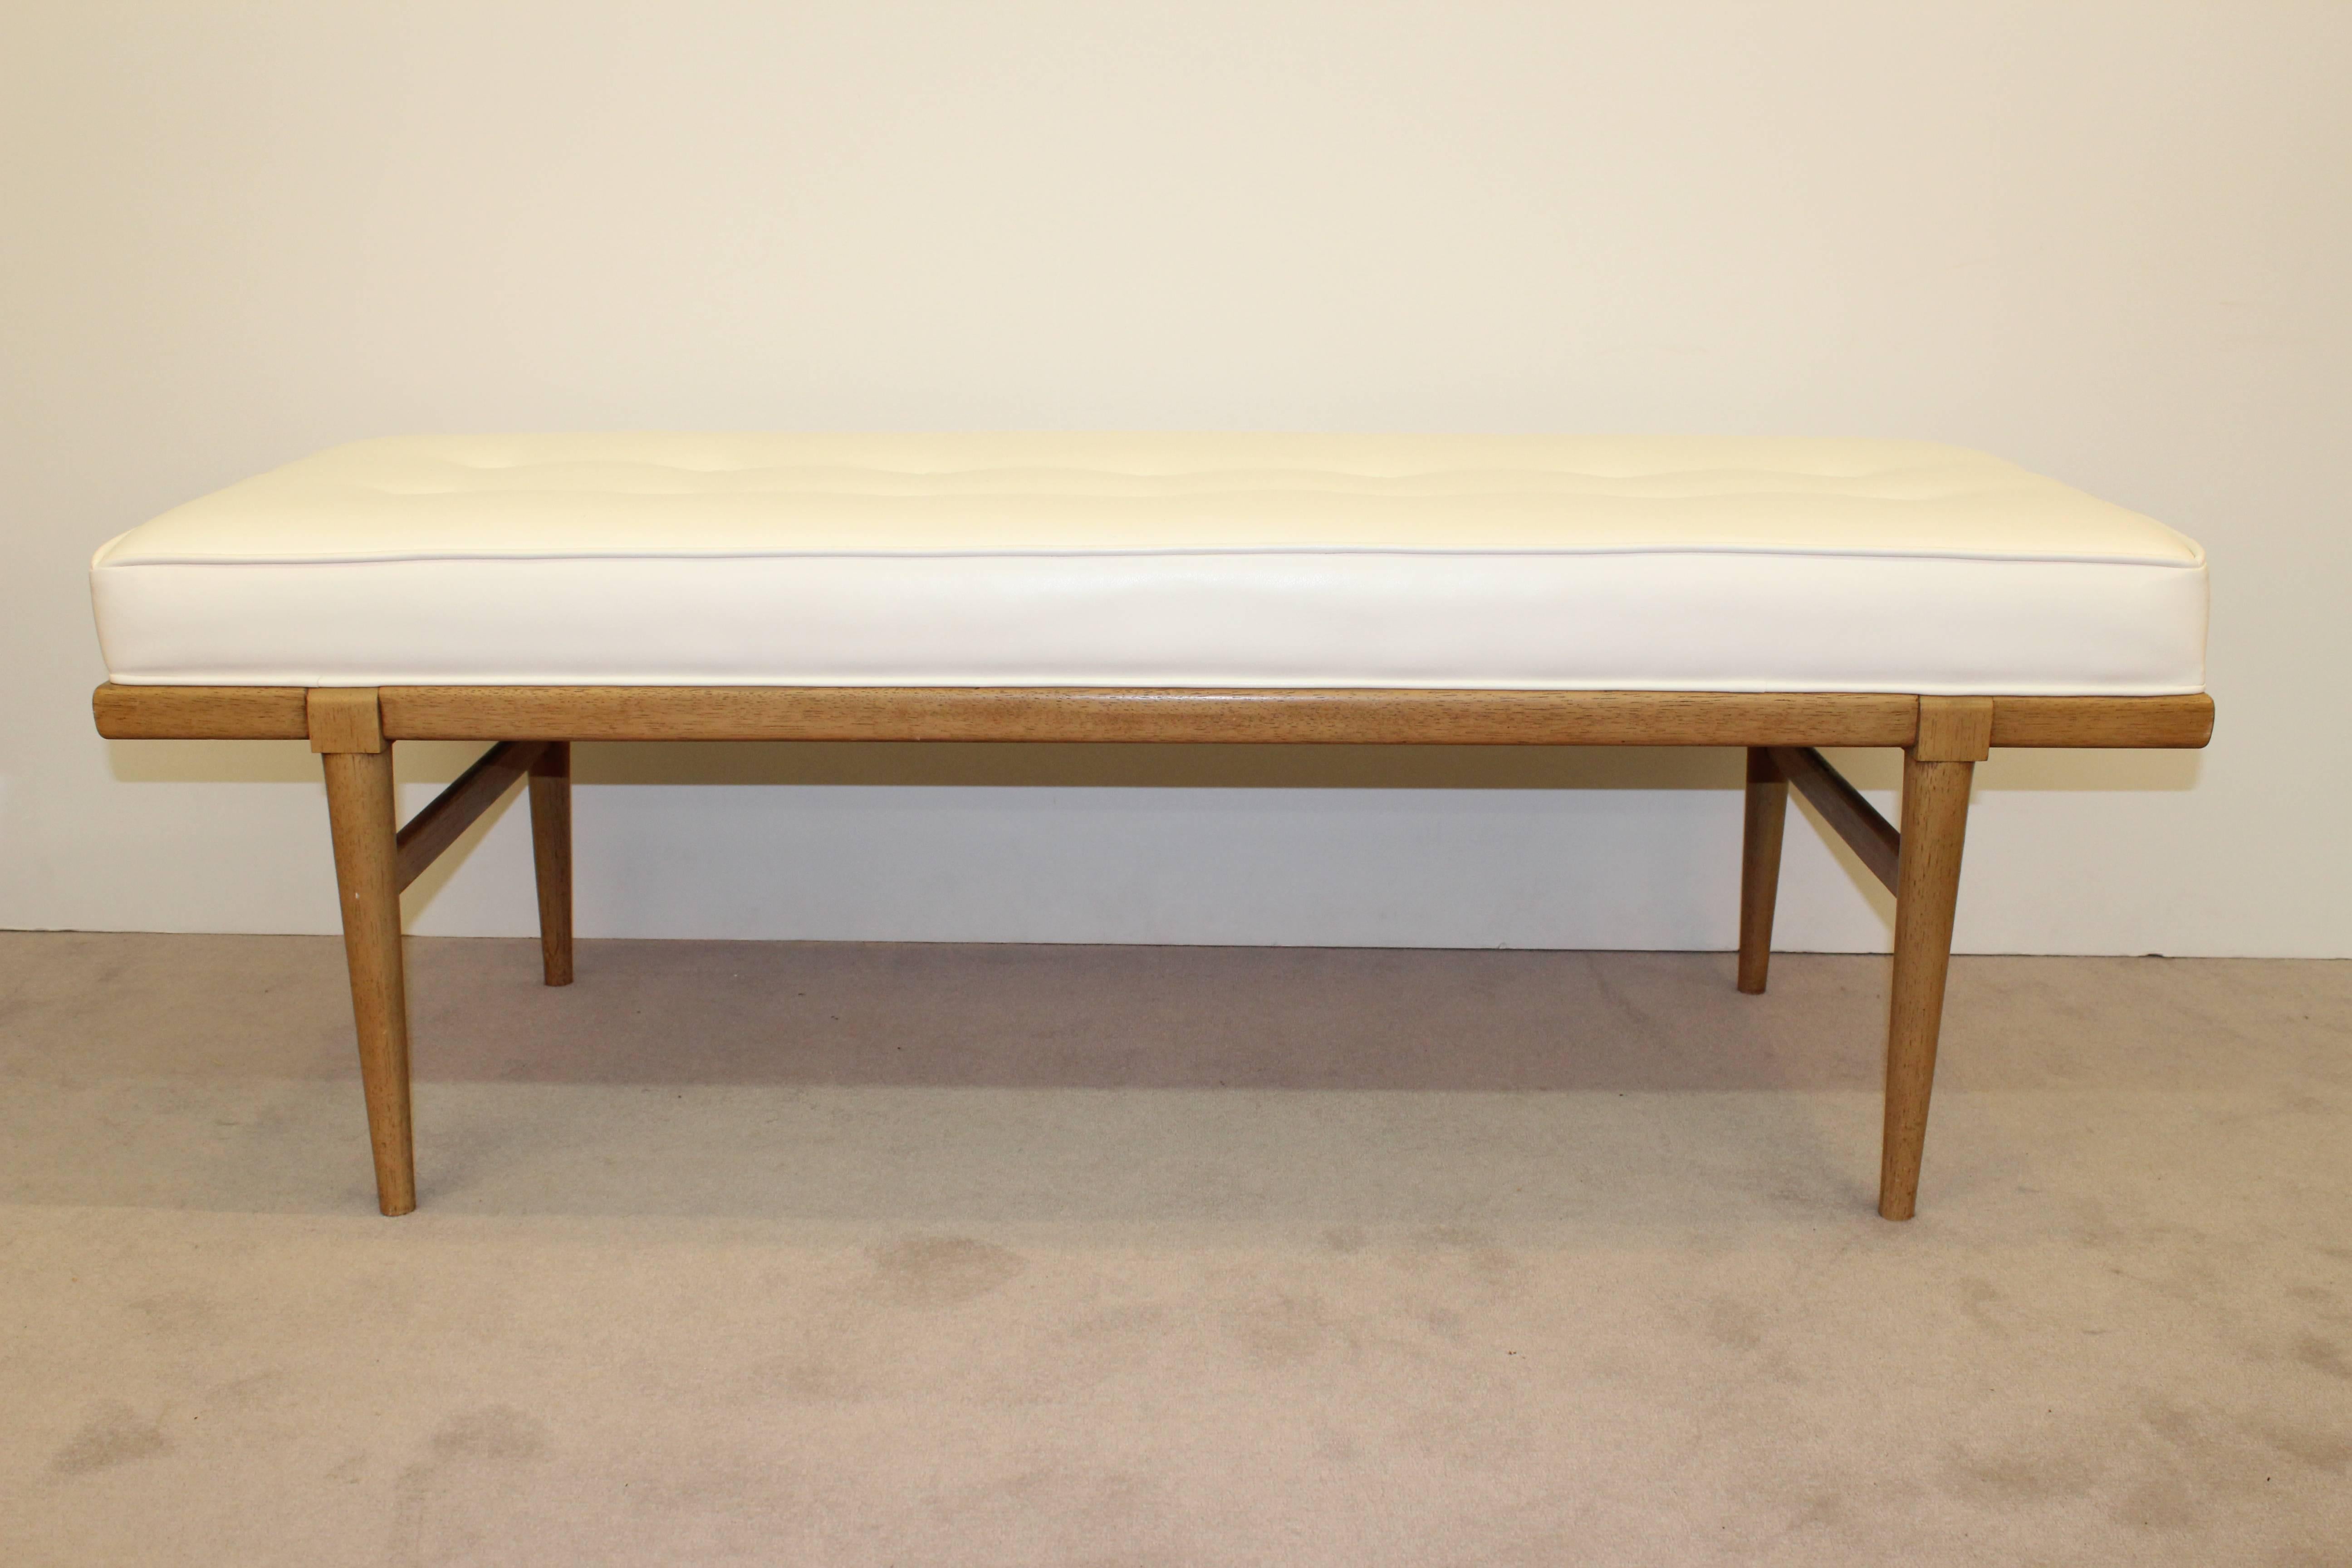 A mahogany bench by Robsjohn-Gibbings. Newly re-upholstered in white leatherette. In very good condition consistent with age and use.

110084